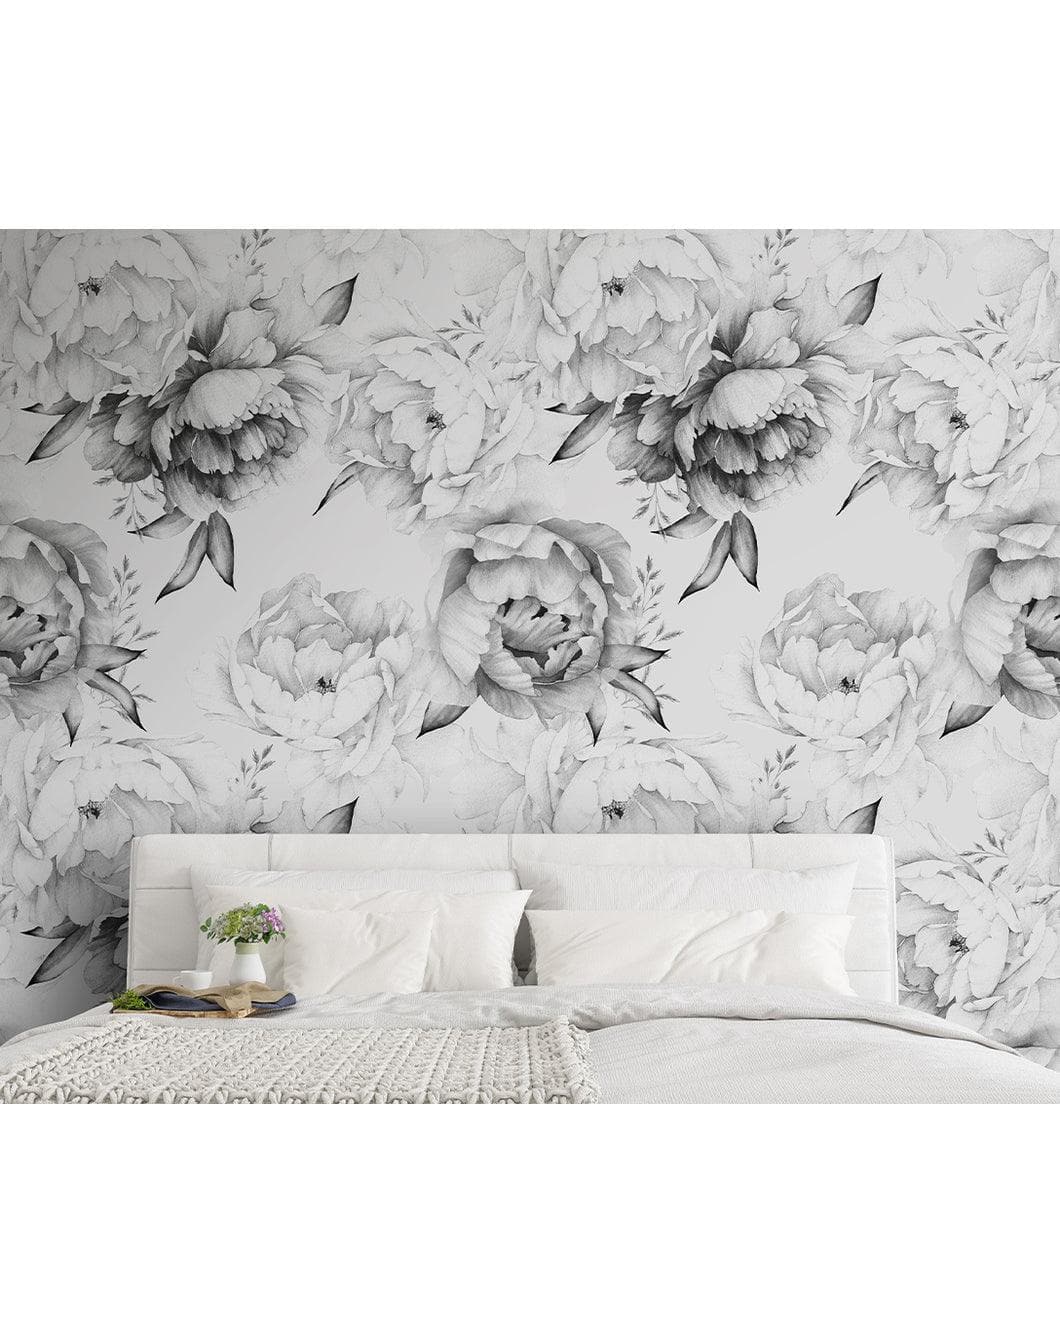 Black and White Peonies Watercolor Large Flowers Wall Mural - MAIA HOMES